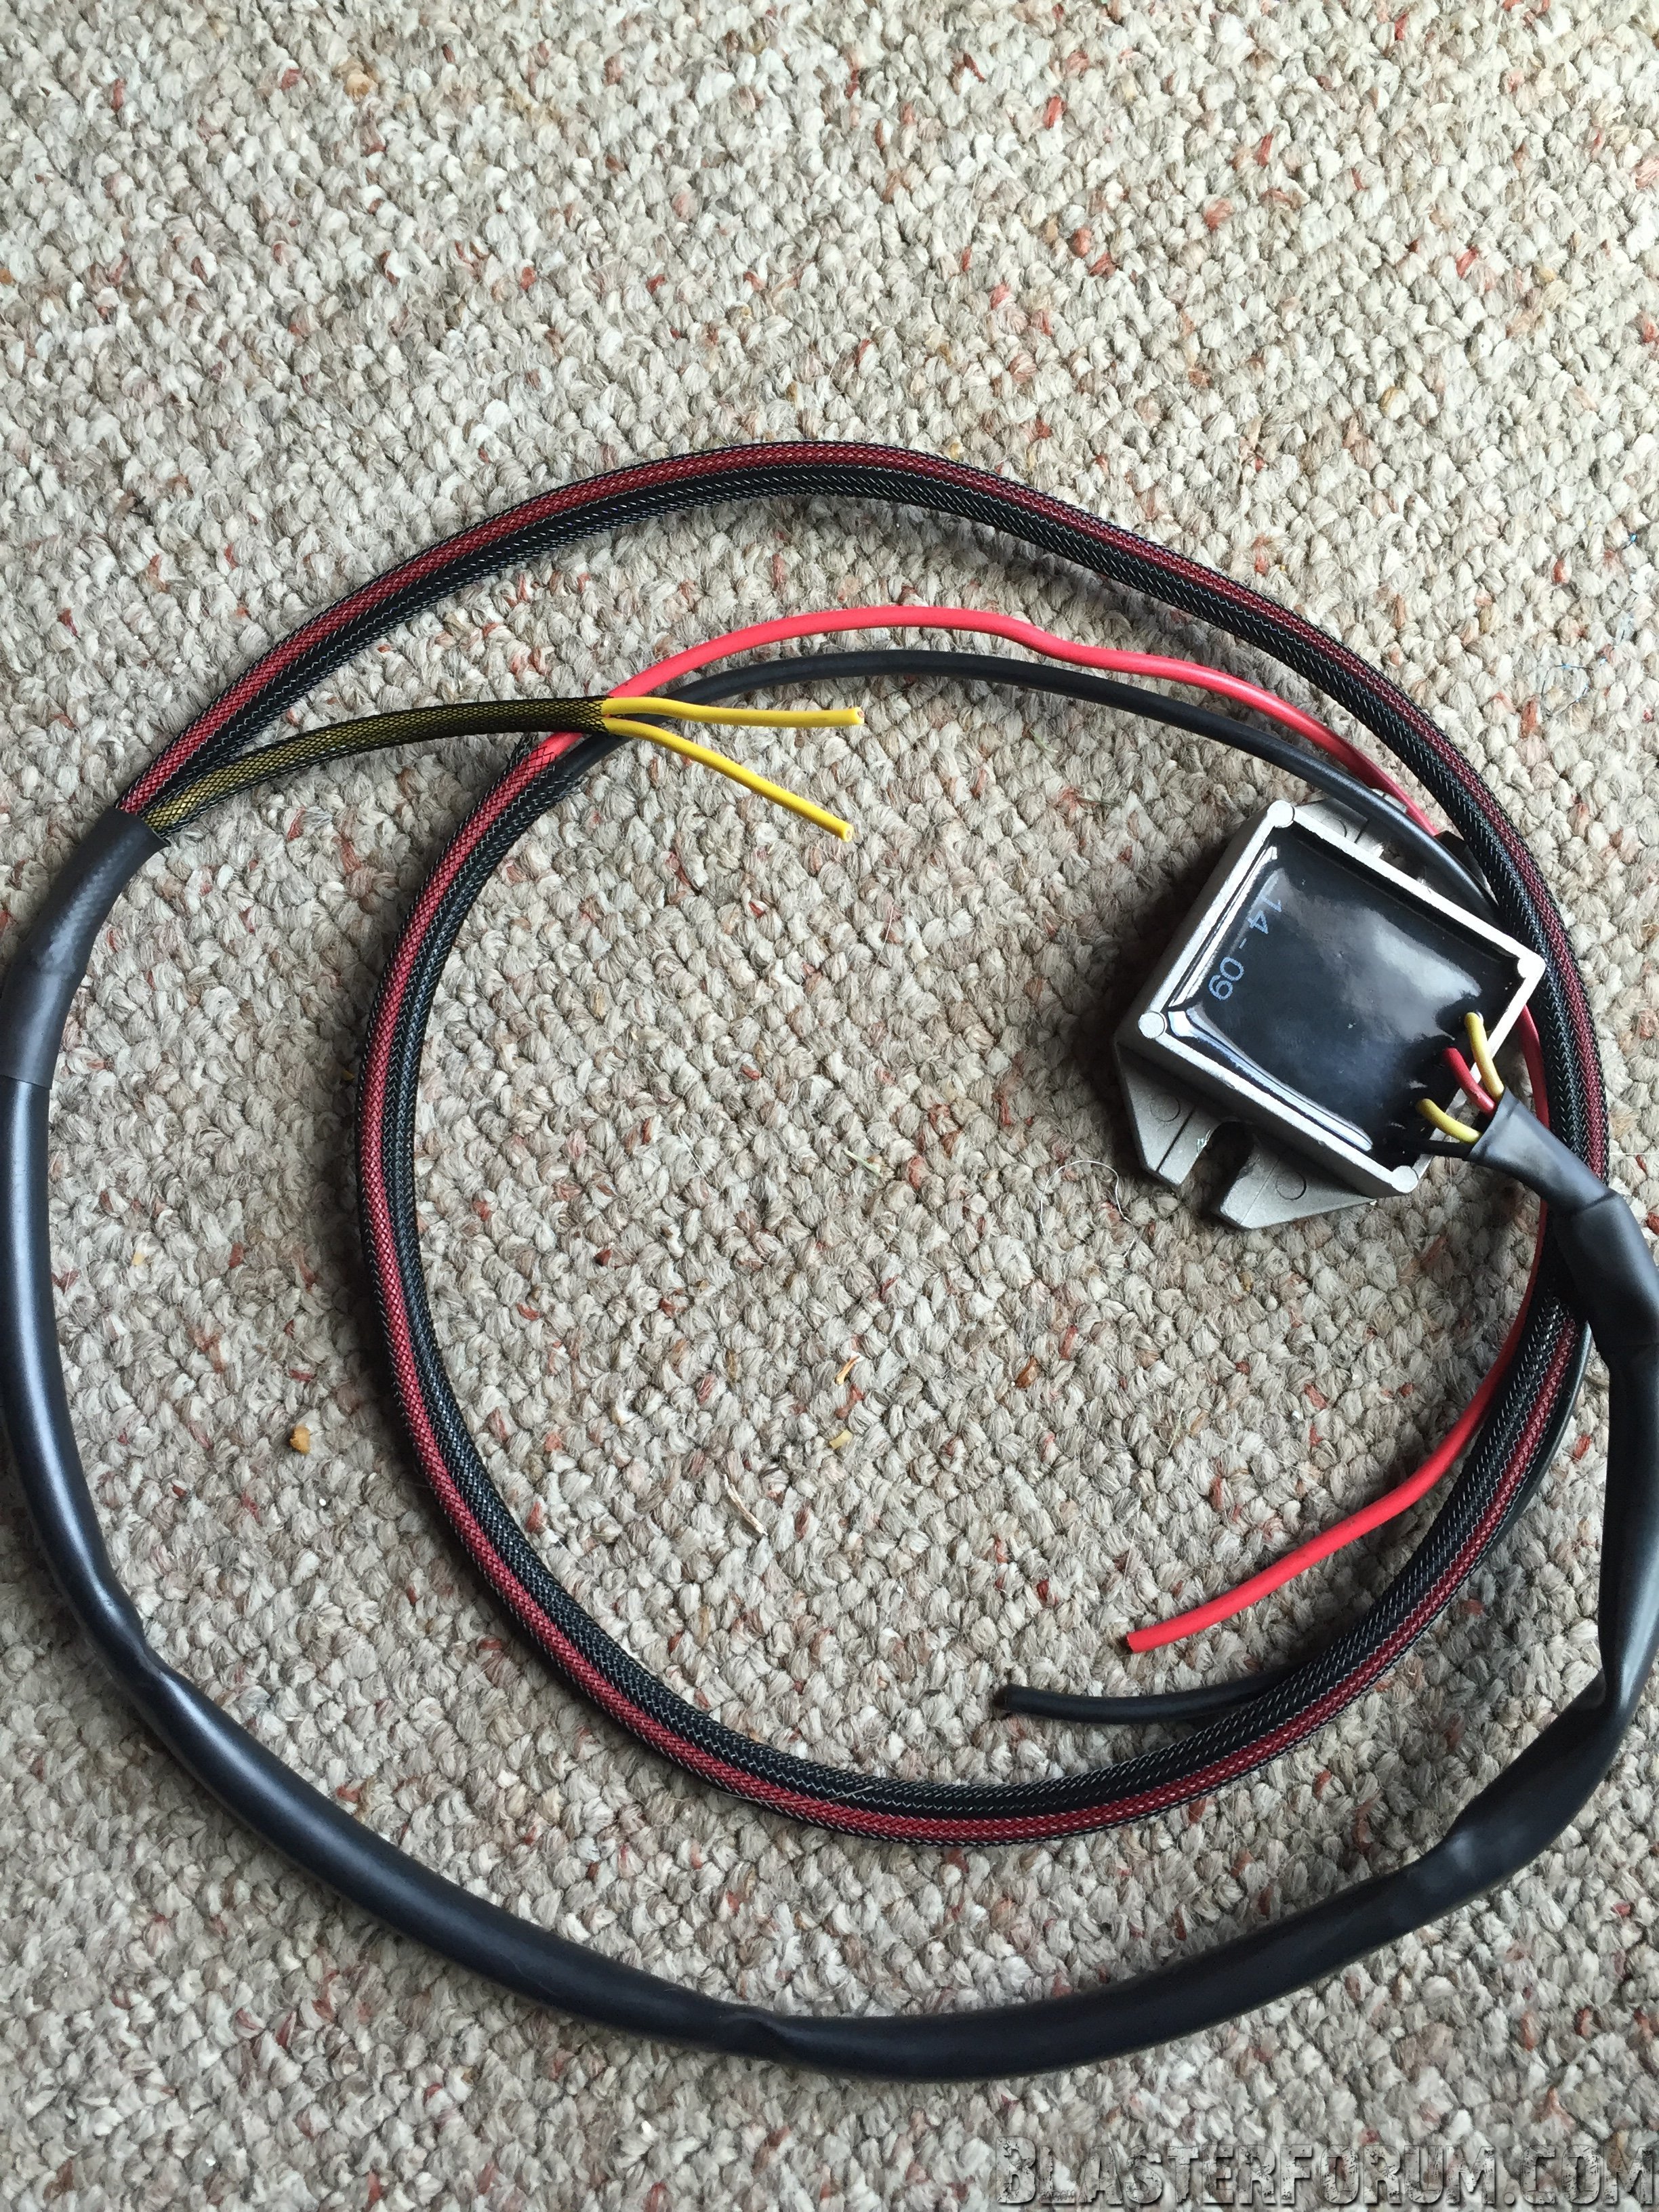 Charging/battery harness